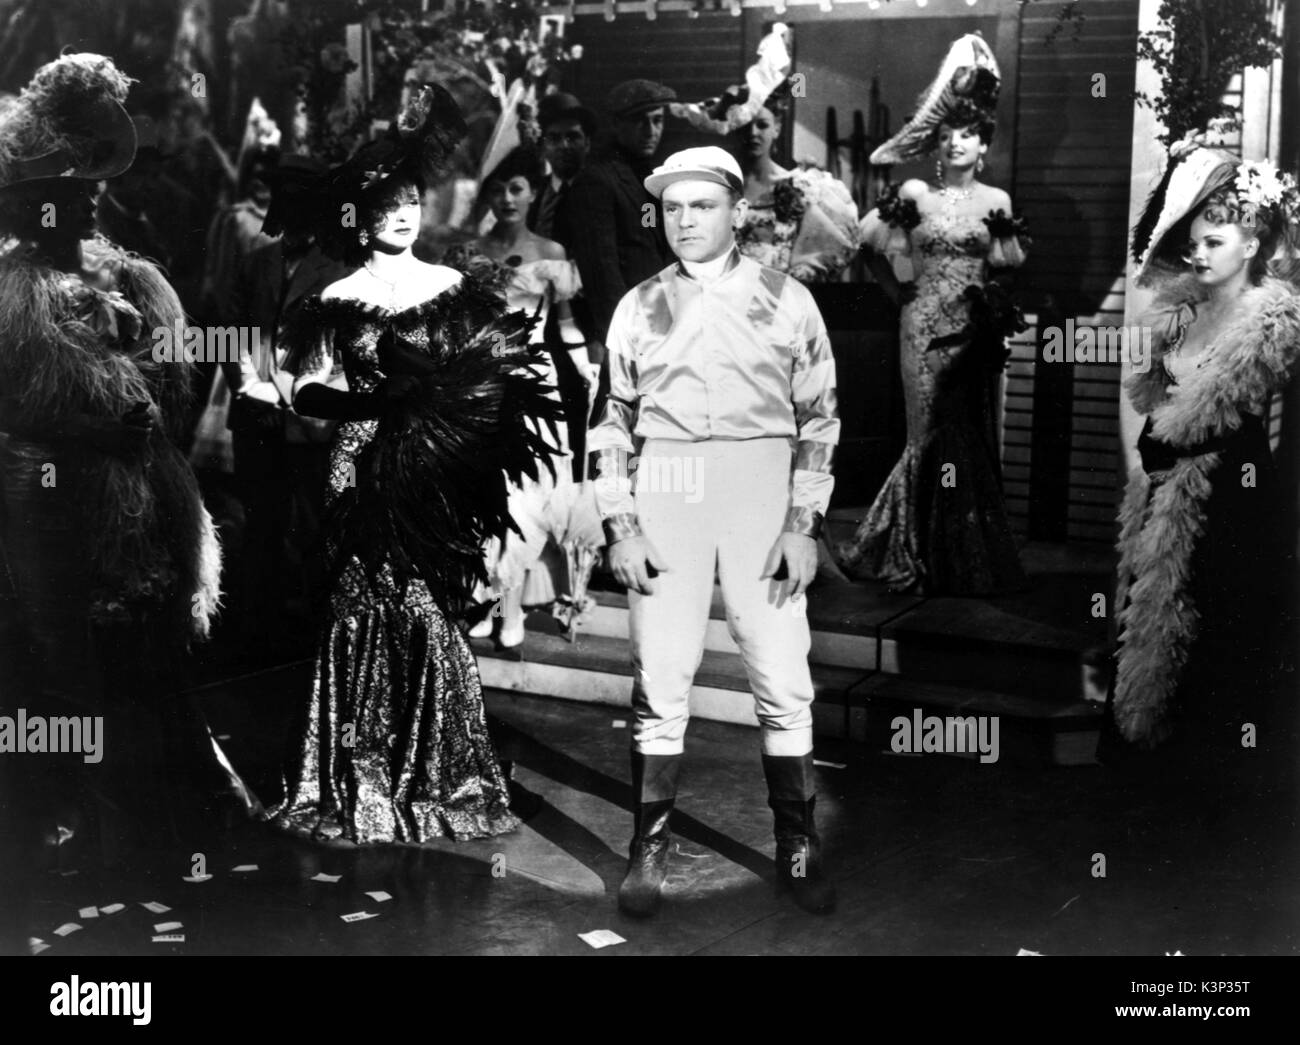 YANKEE DOODLE DANDY [US 1942] JAMES CAGNEY     Date: 1942 Stock Photo